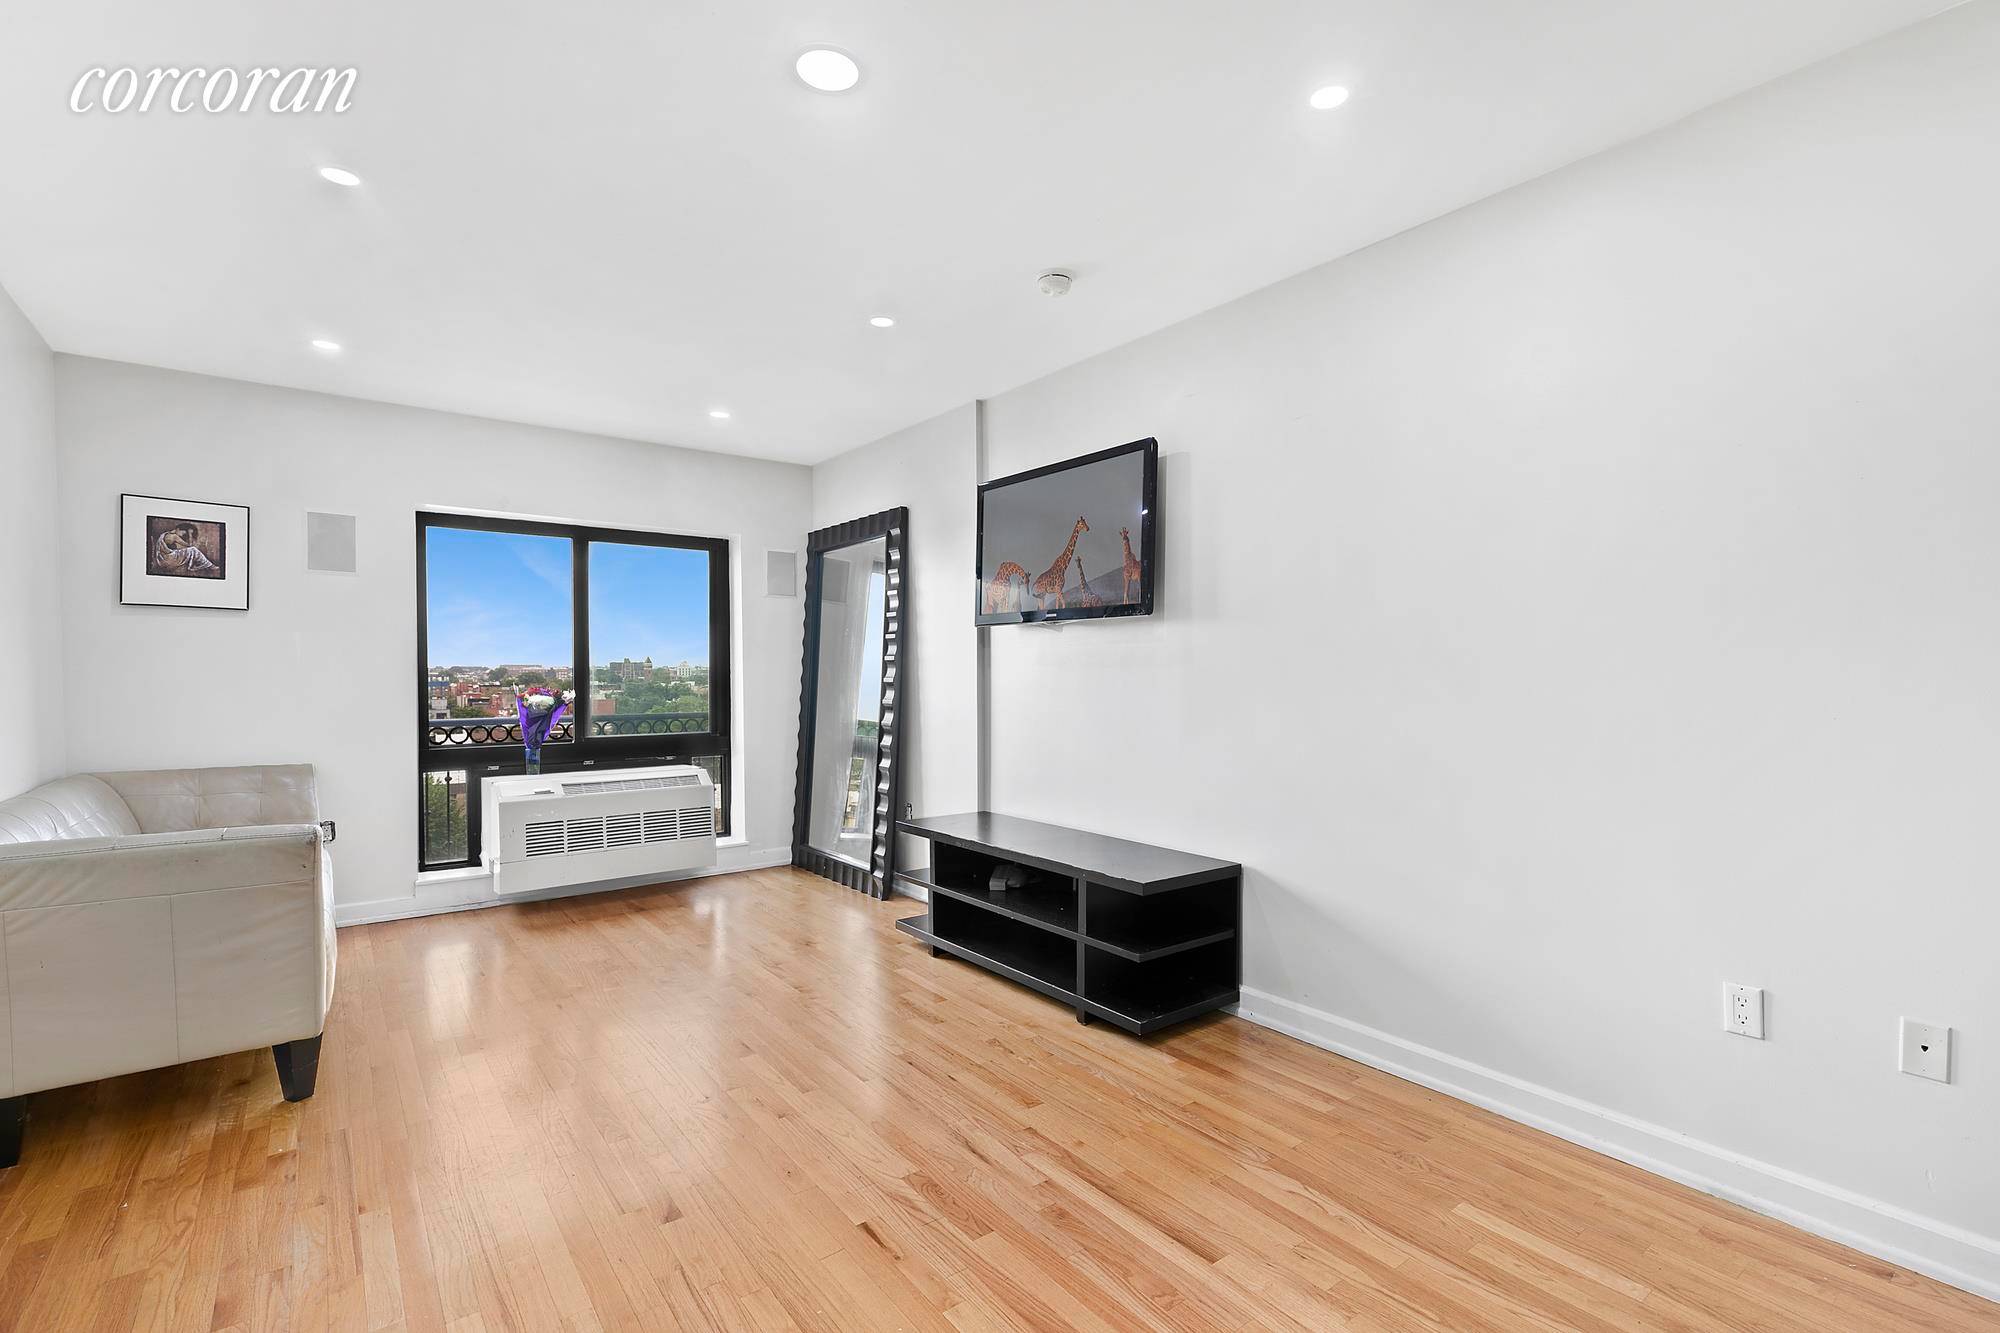 Located on a beautiful tree lined block on Lafayette Avenue in Bedford Stuyvesant.